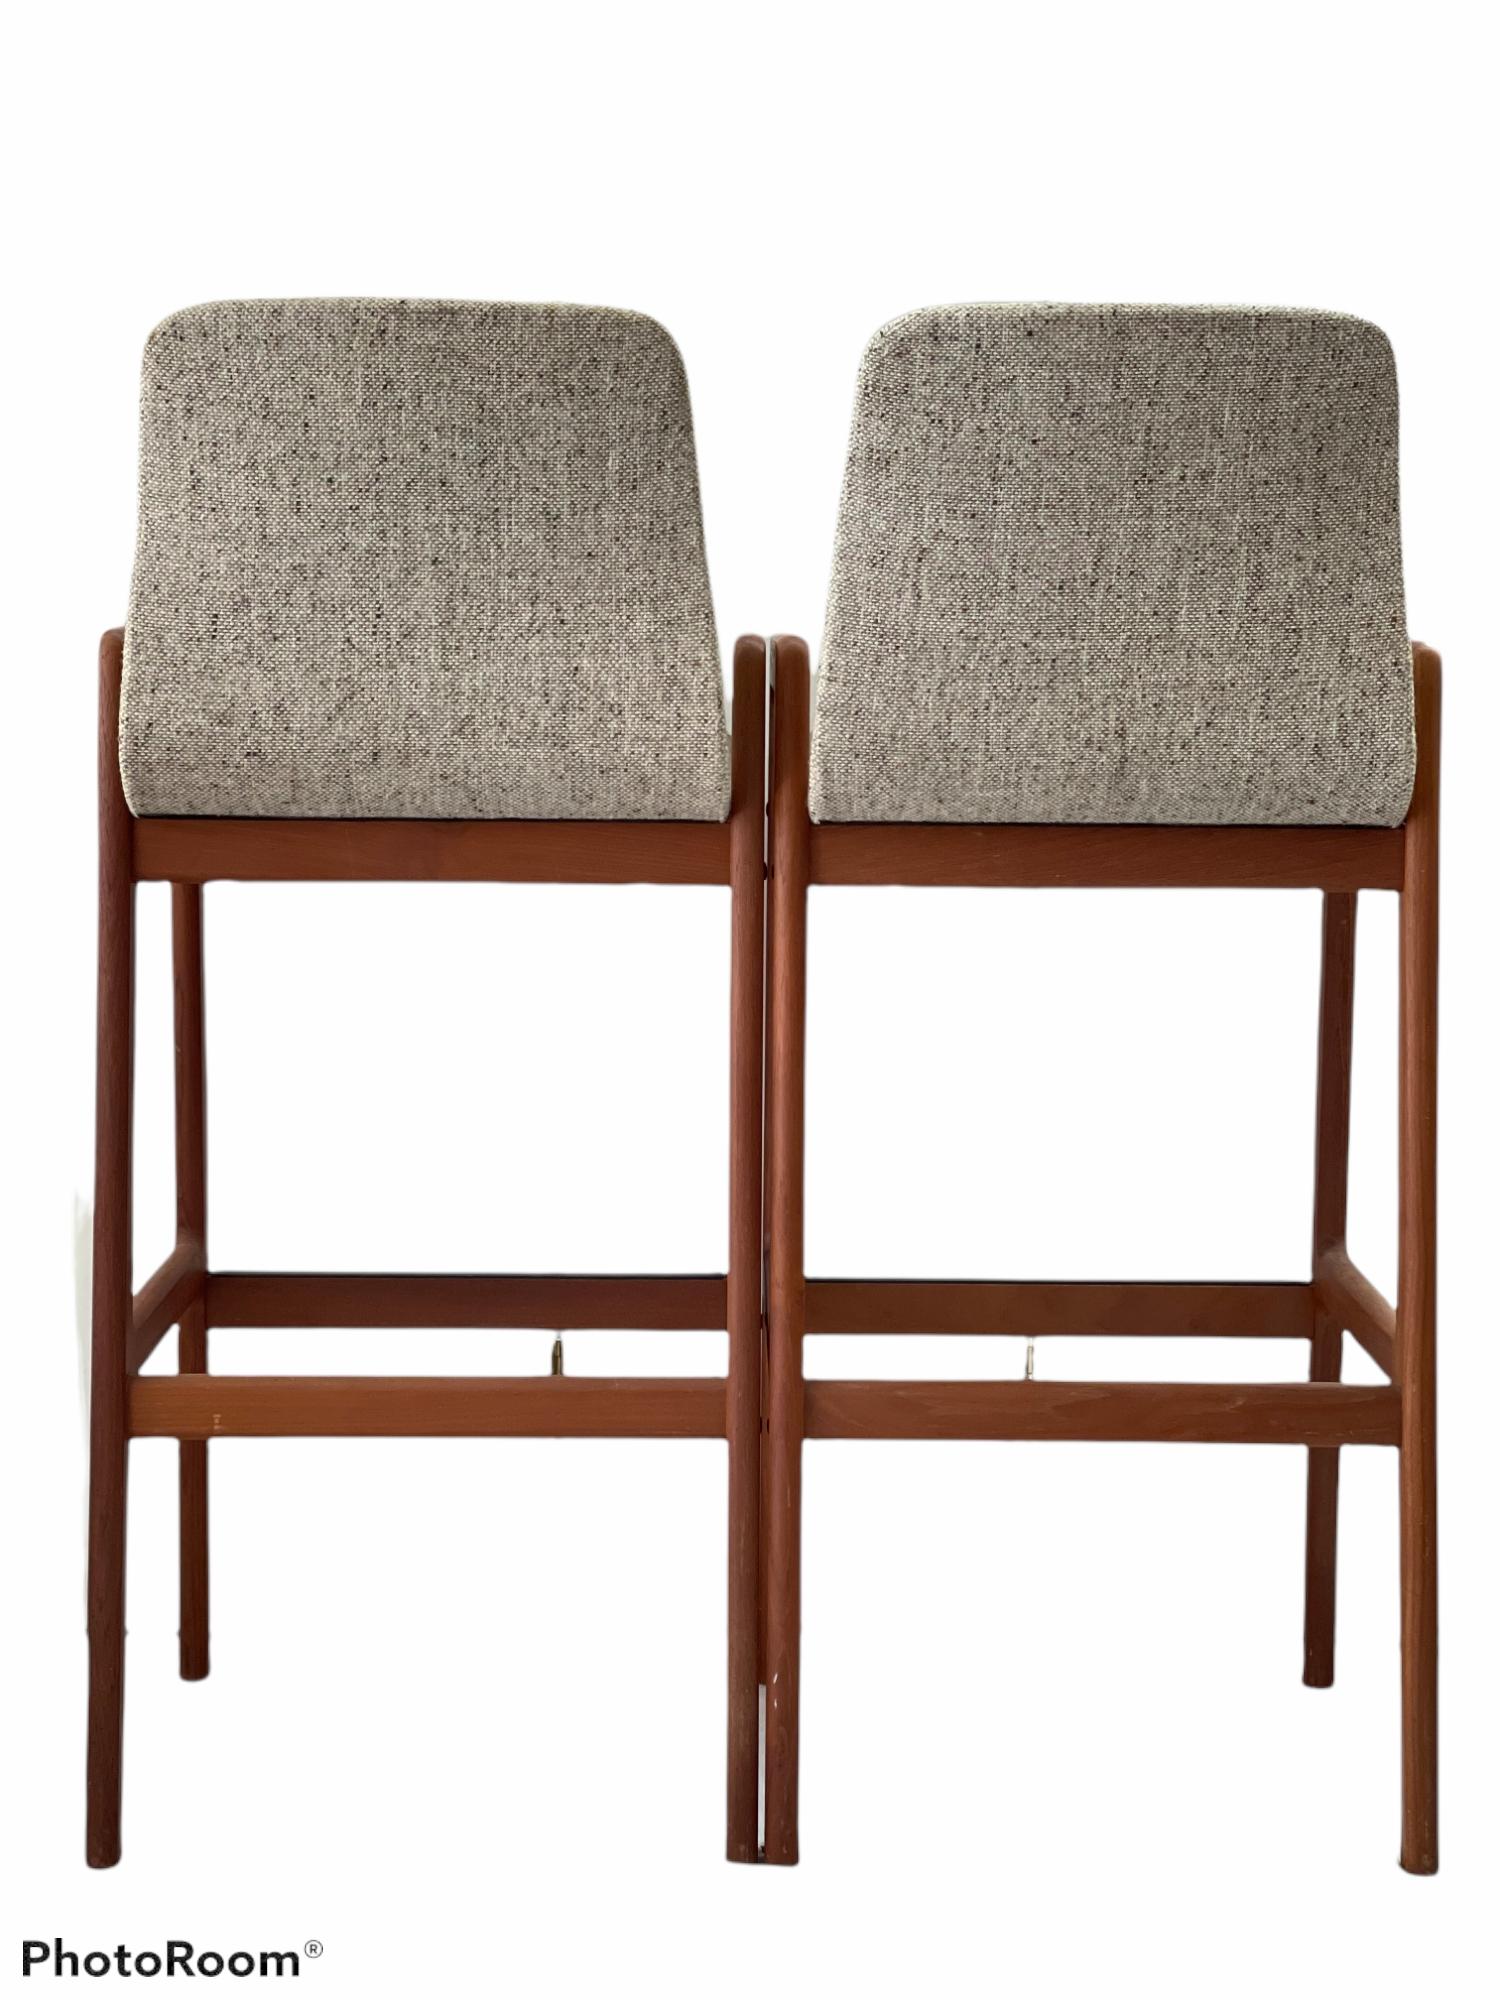 For sale we have a pair of danish modern teak barstools made in Denmark. They are in good condition overall. They don't have any tears or stains.